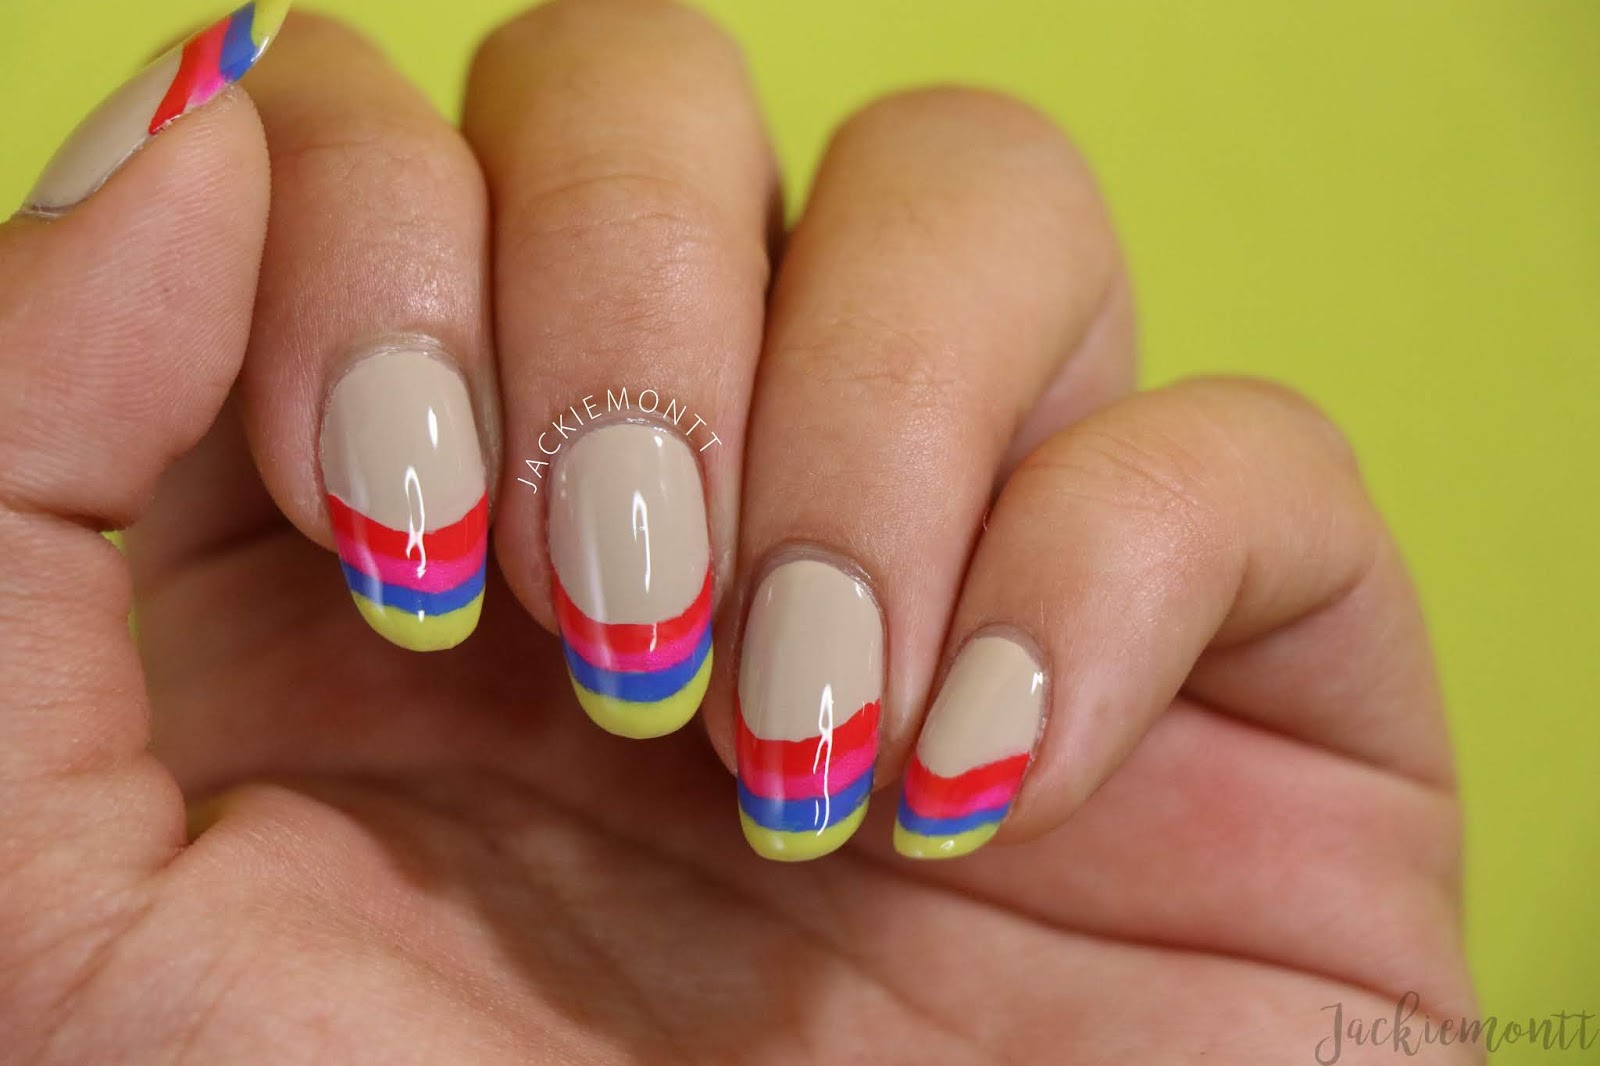 2. Tropical Nail Art Designs You Can Do Yourself - wide 8